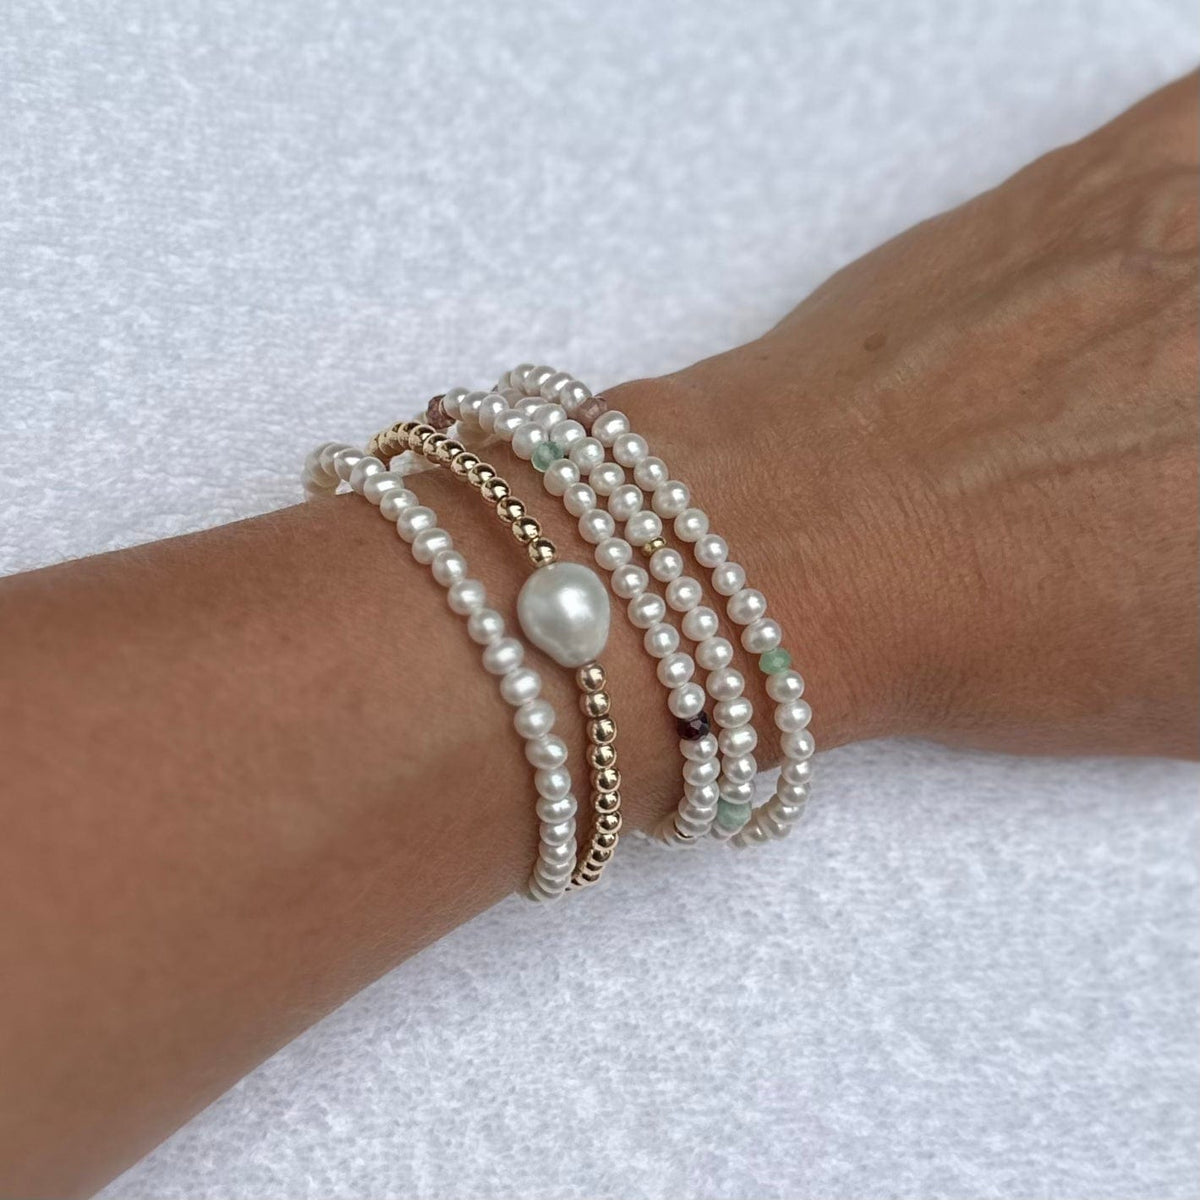 Pearl Wrap Bracelet and Necklace in One